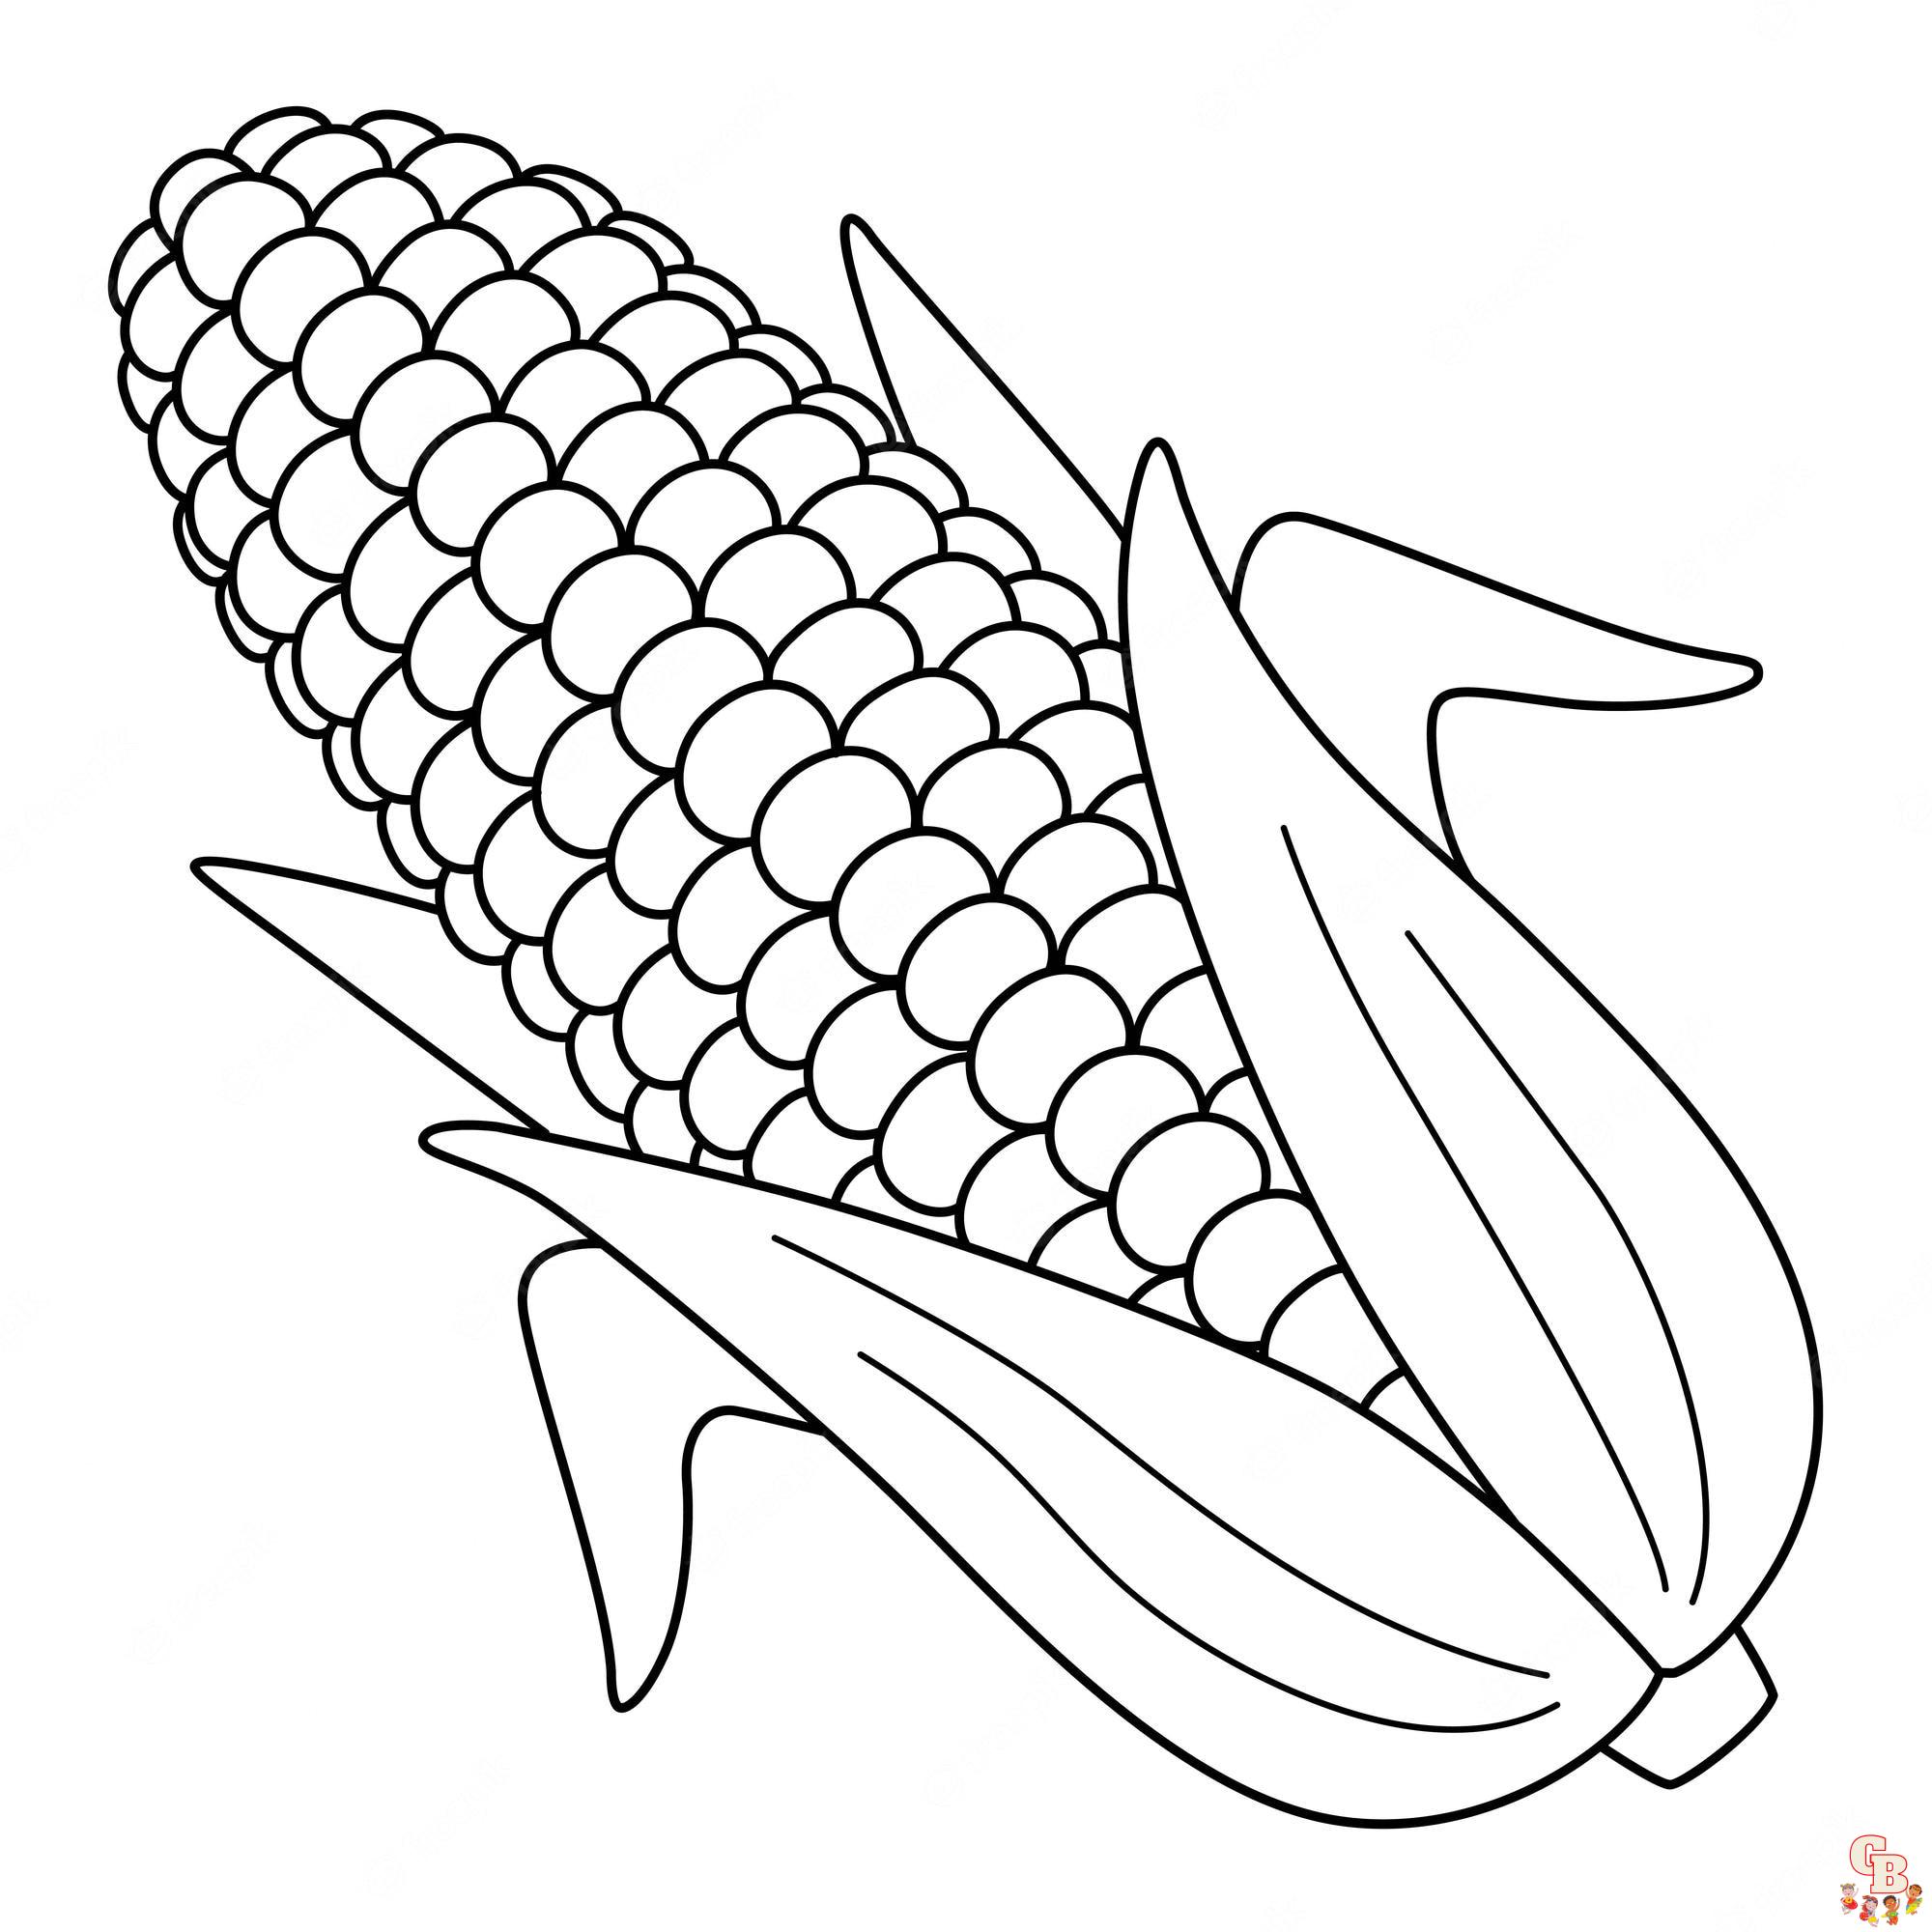 Corn Coloring Pages 11